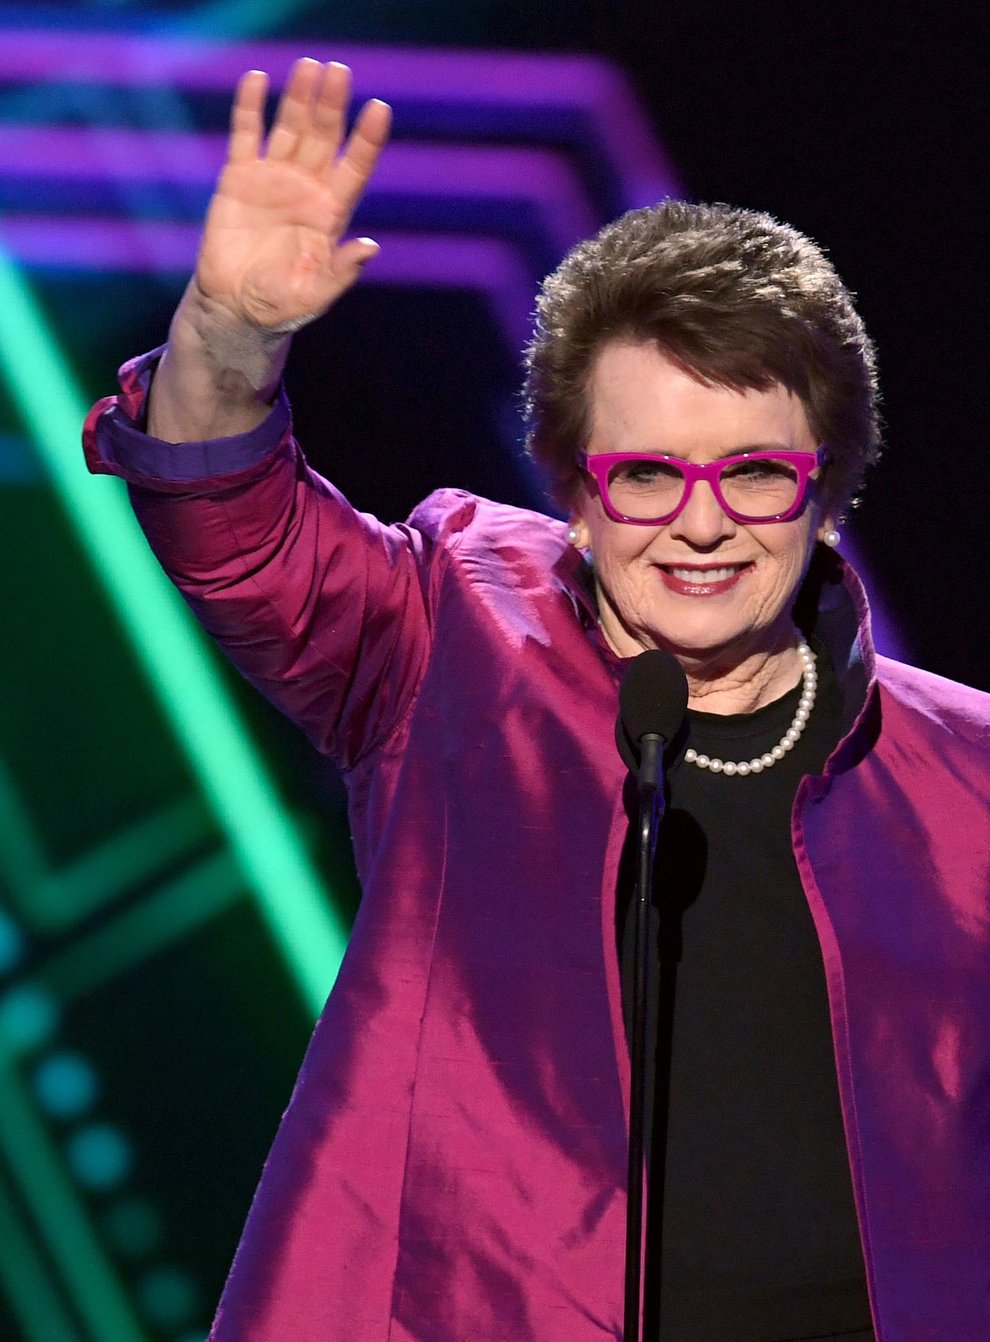 Billie Jean King showed support for Sherrock at the World Darts Championship (Twitter: @WTA)